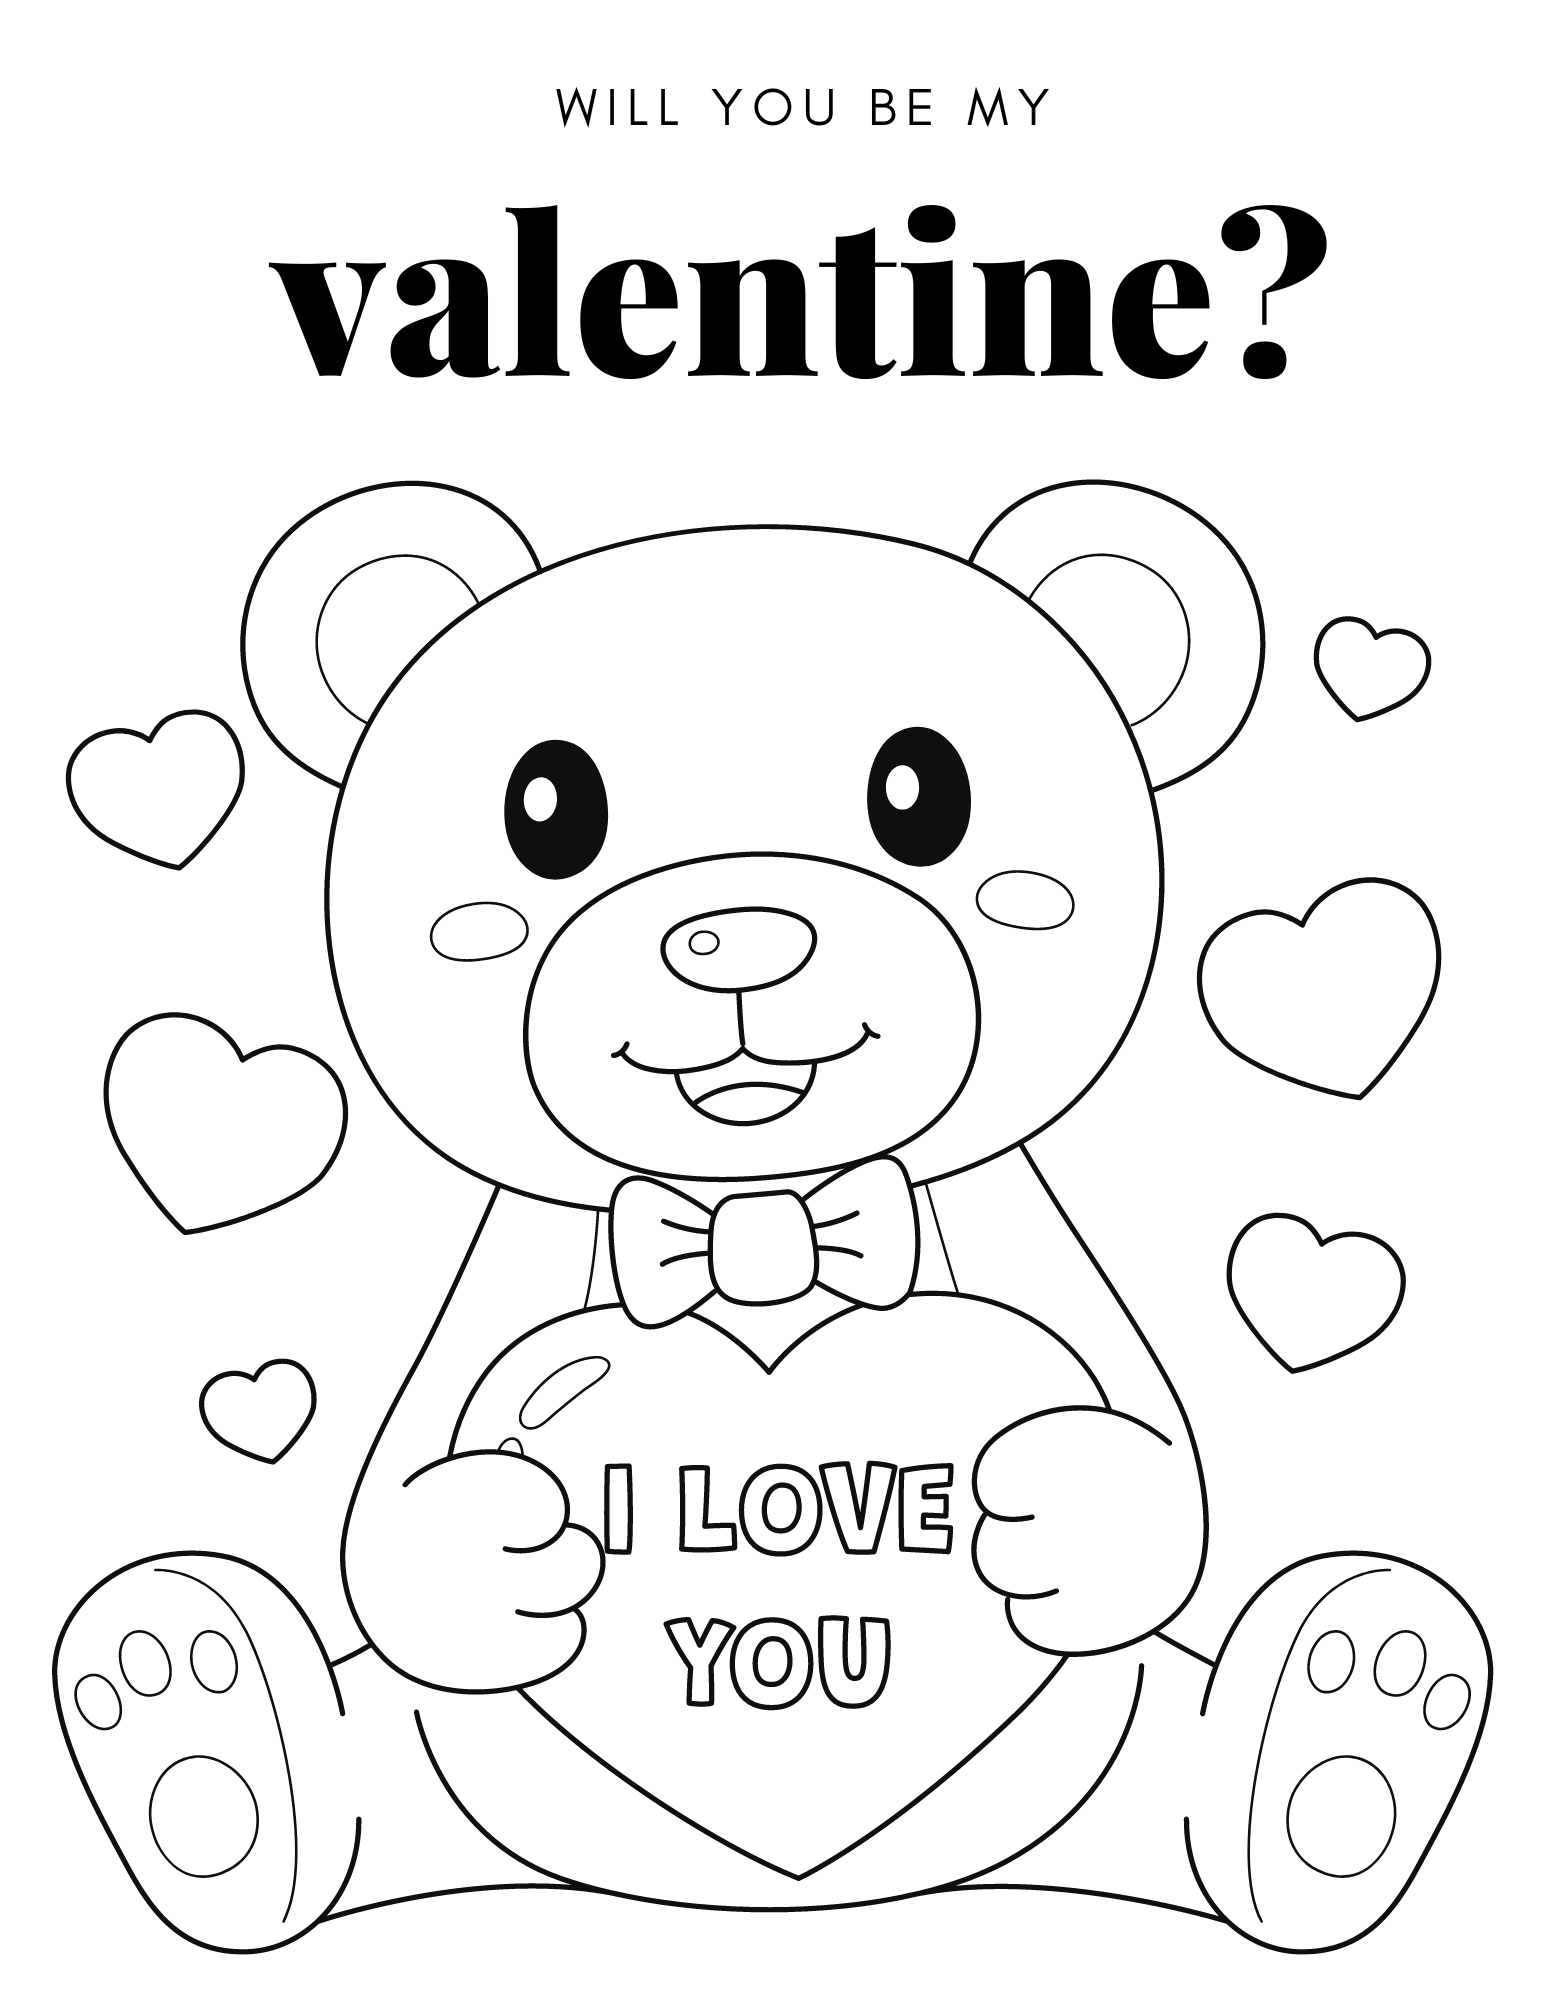 Cute FREE Valentine's Day Coloring Pages for Kids — xoxoerinsmith.com